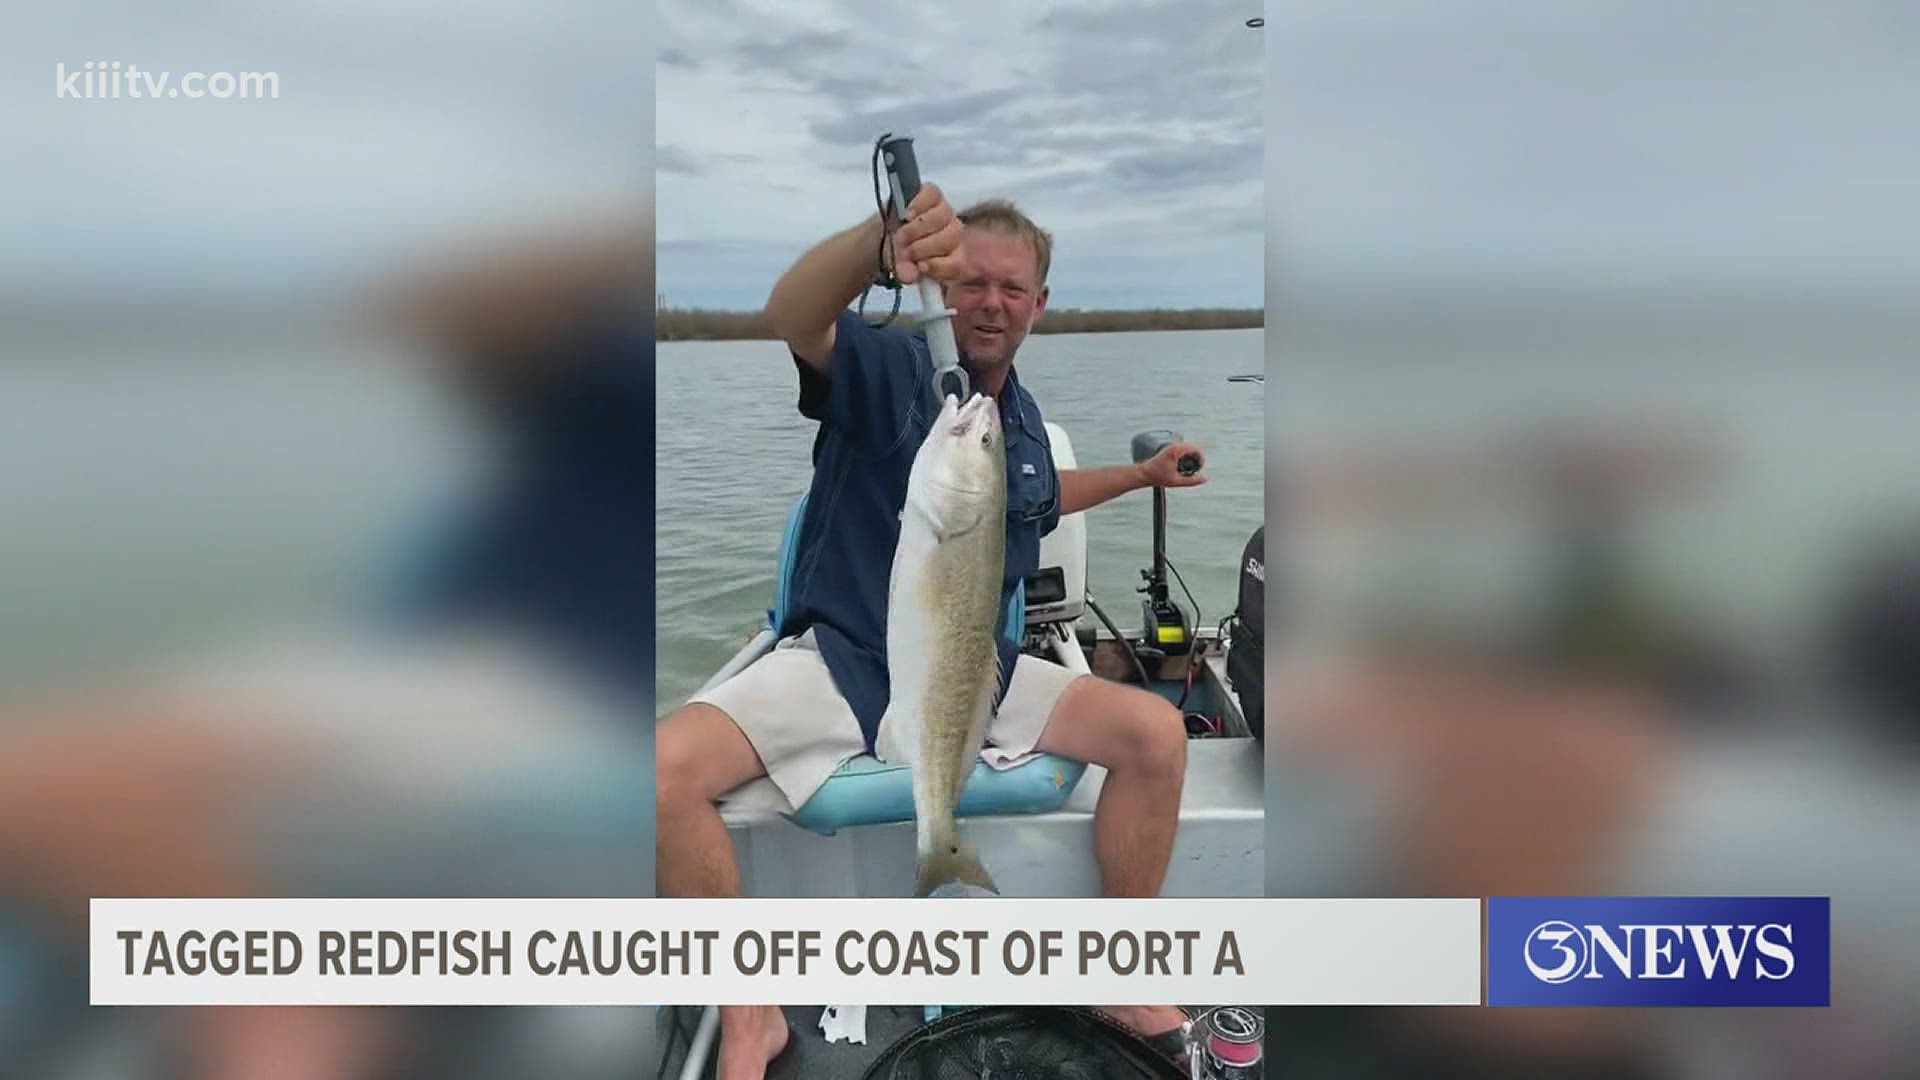 Just the other day, his family convinced him to make a fishing trip, and a couple of casts later, he caught the tagged red fish and the prize that comes with it.